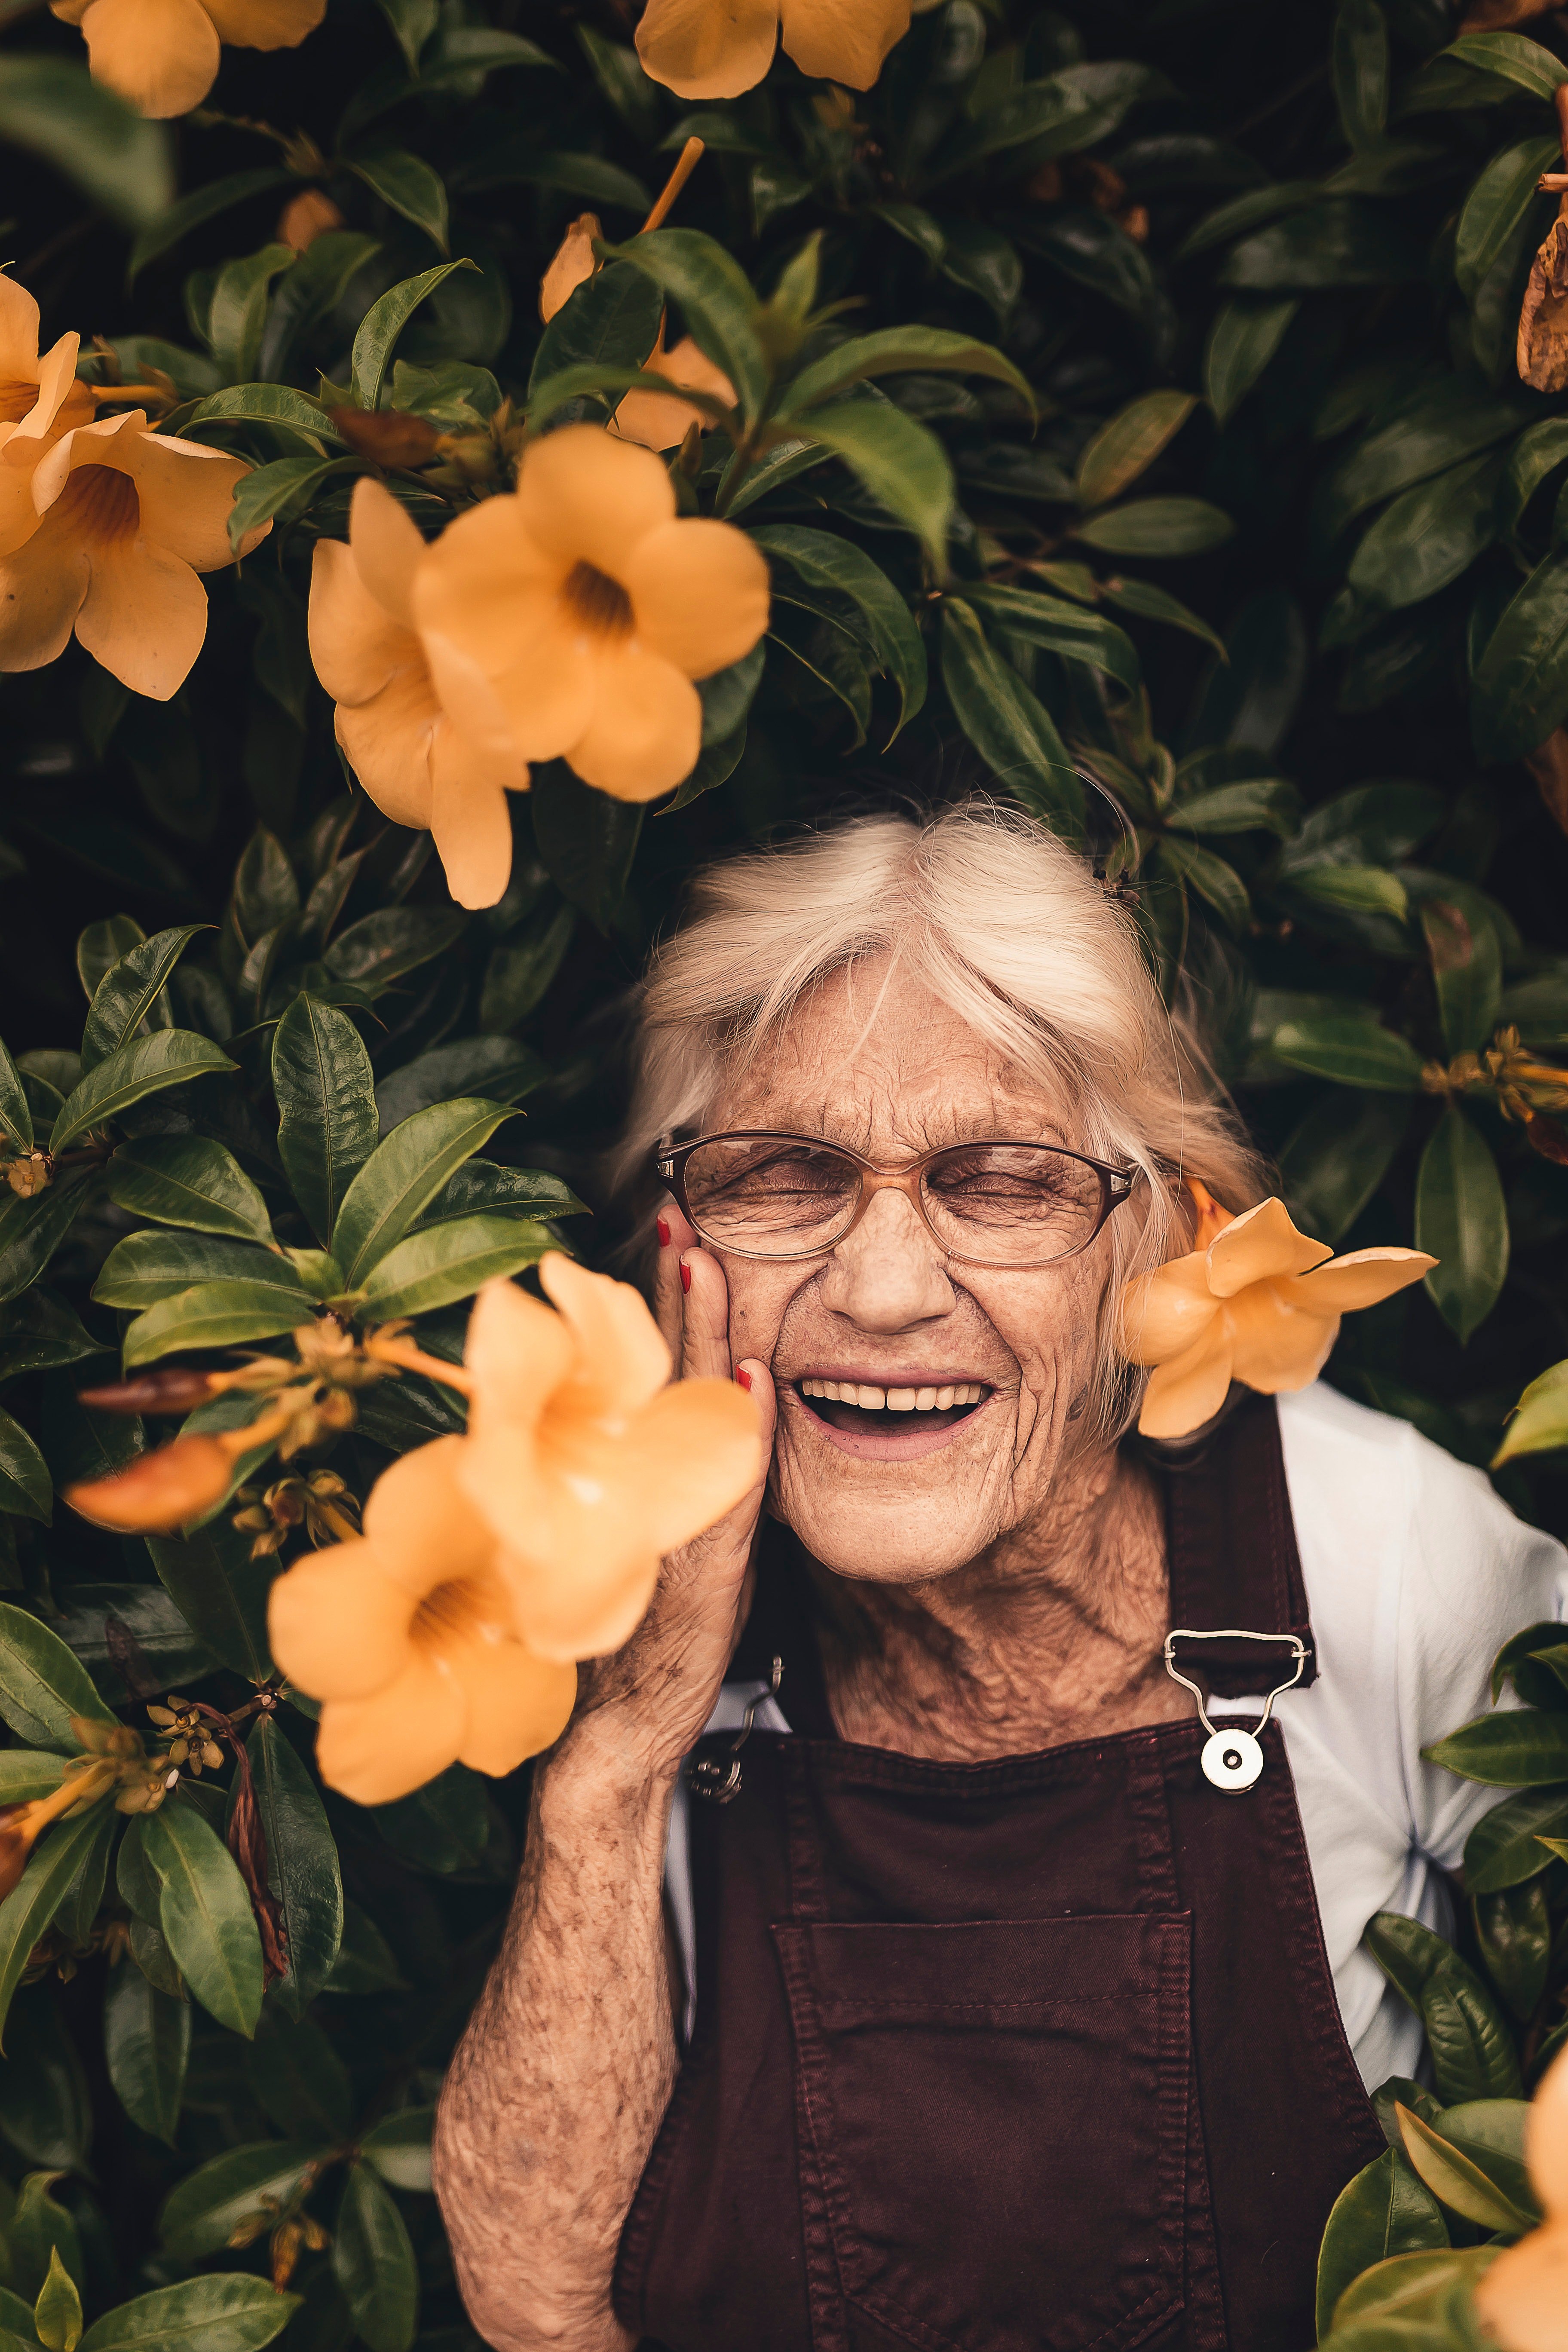 A happy old woman. | Source: Pexels